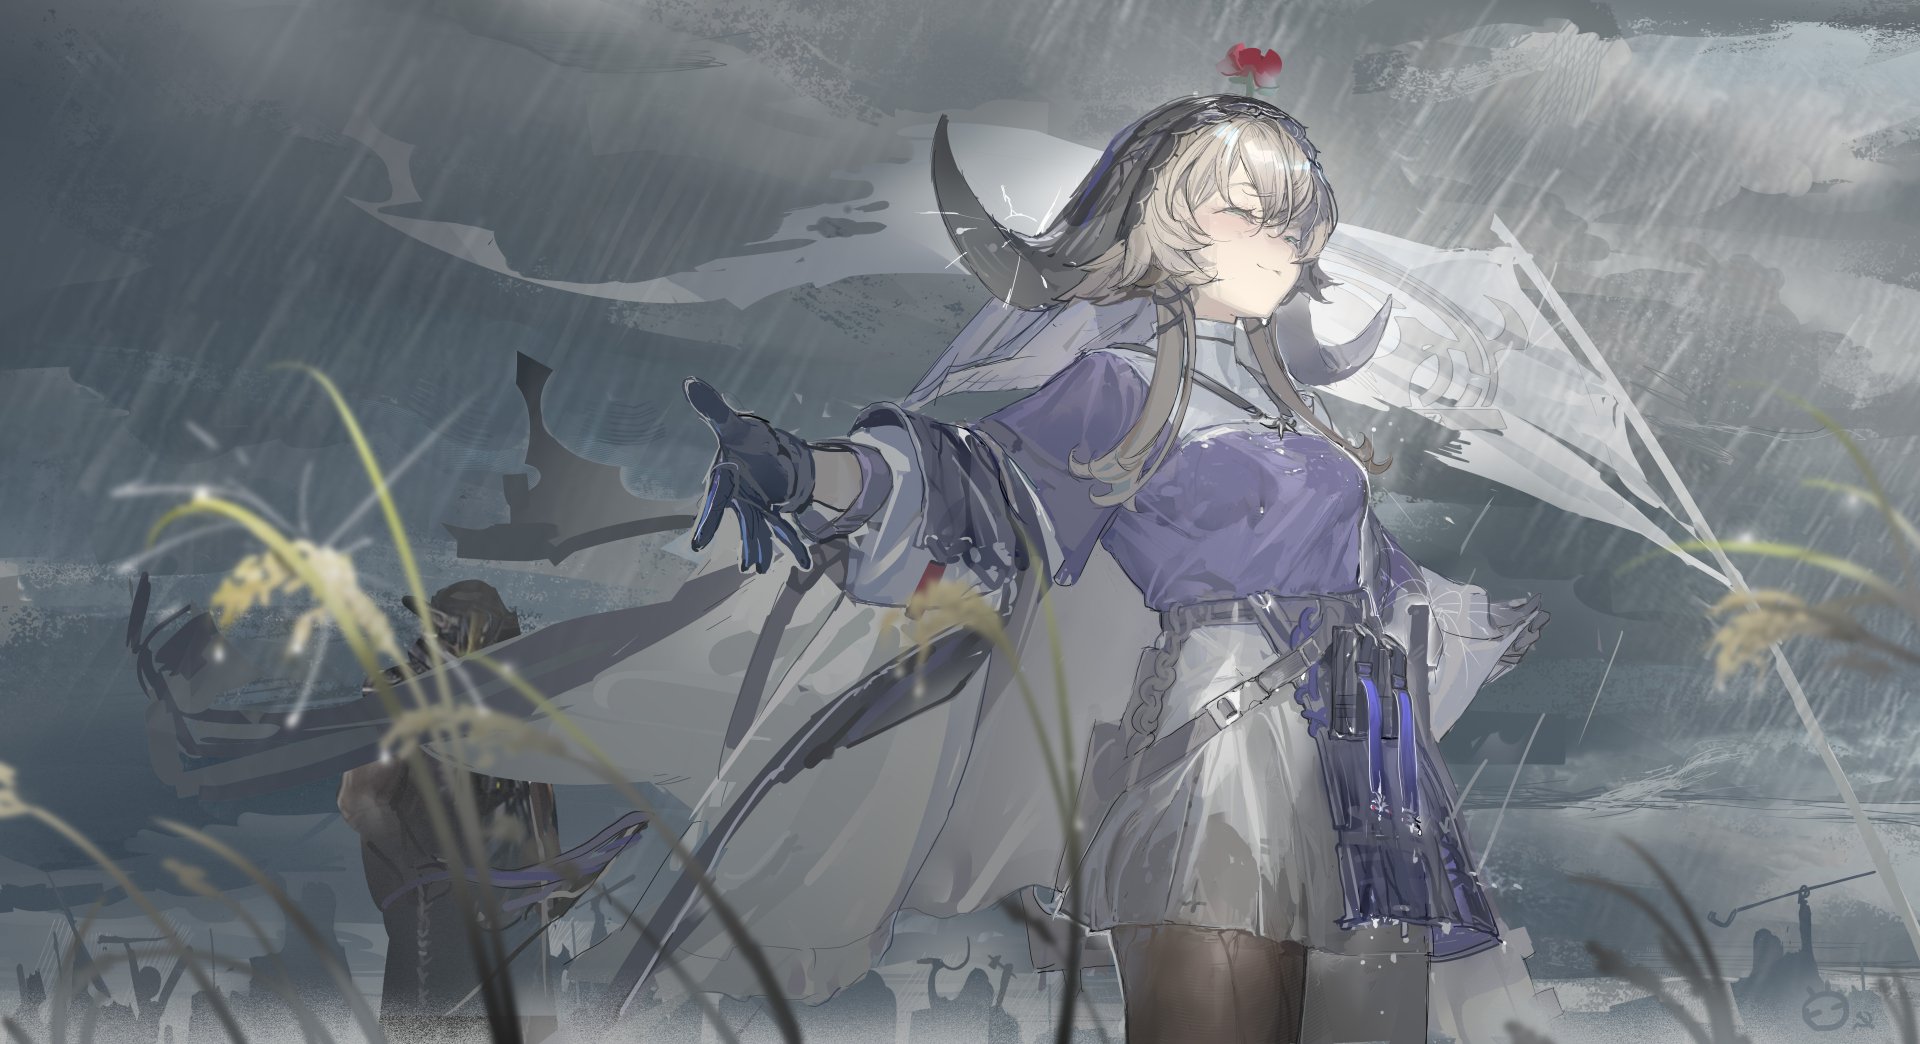 Anime Anime Girls Arknights Video Games Fantasy Art Fantasy Girl Video Game Girls Rain Closed Eyes P 1920x1044